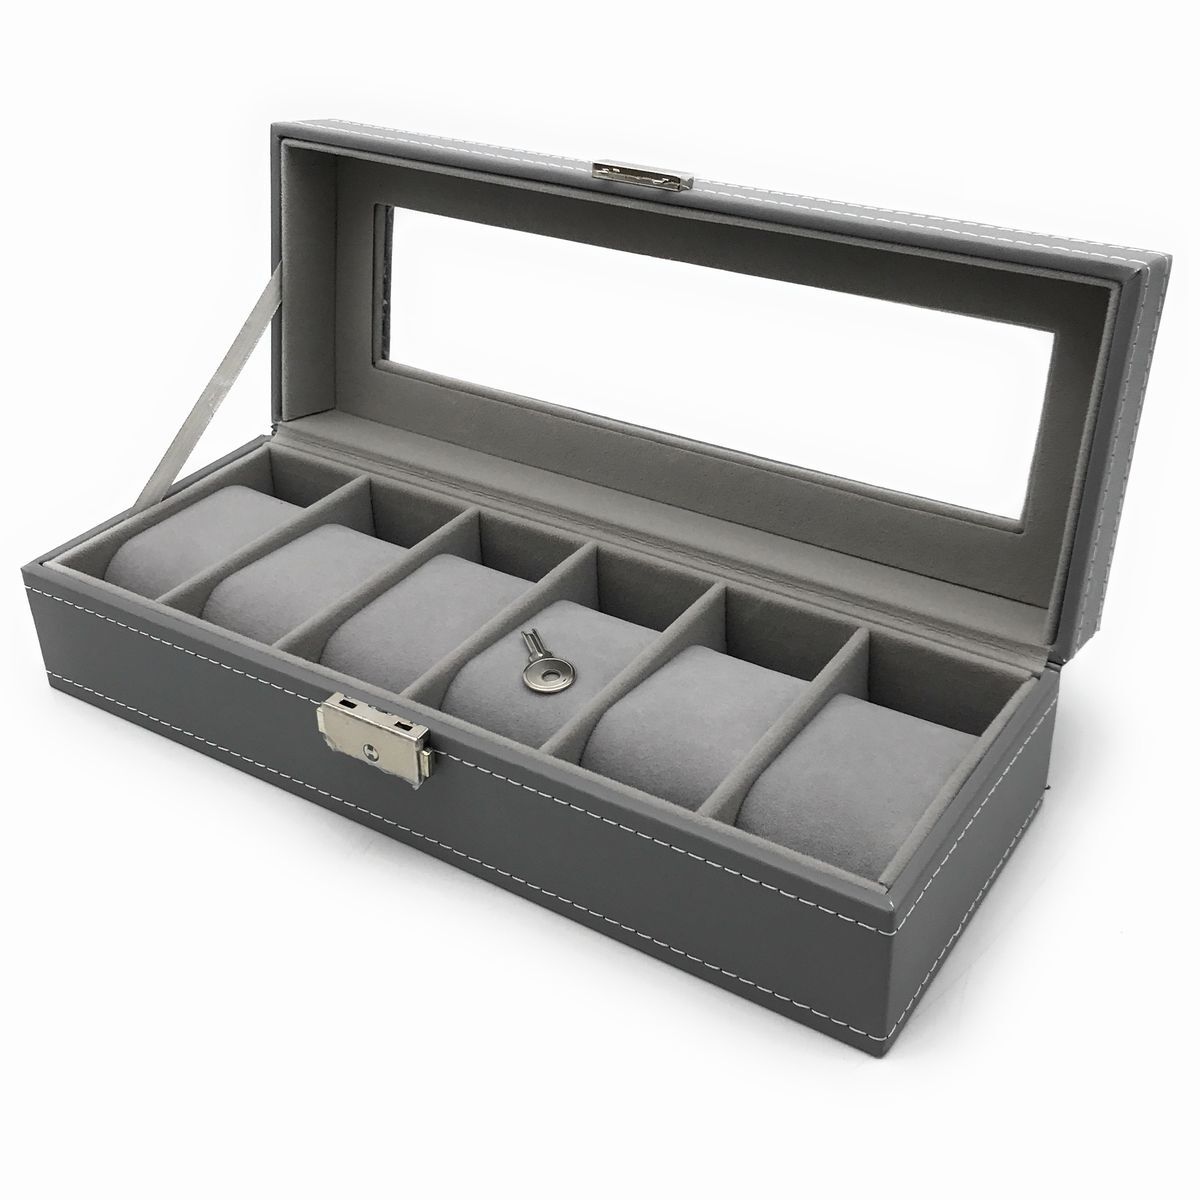  with translation arm clock case collection box leather manner white stitch key attaching ( gray ×6ps.@ storage )